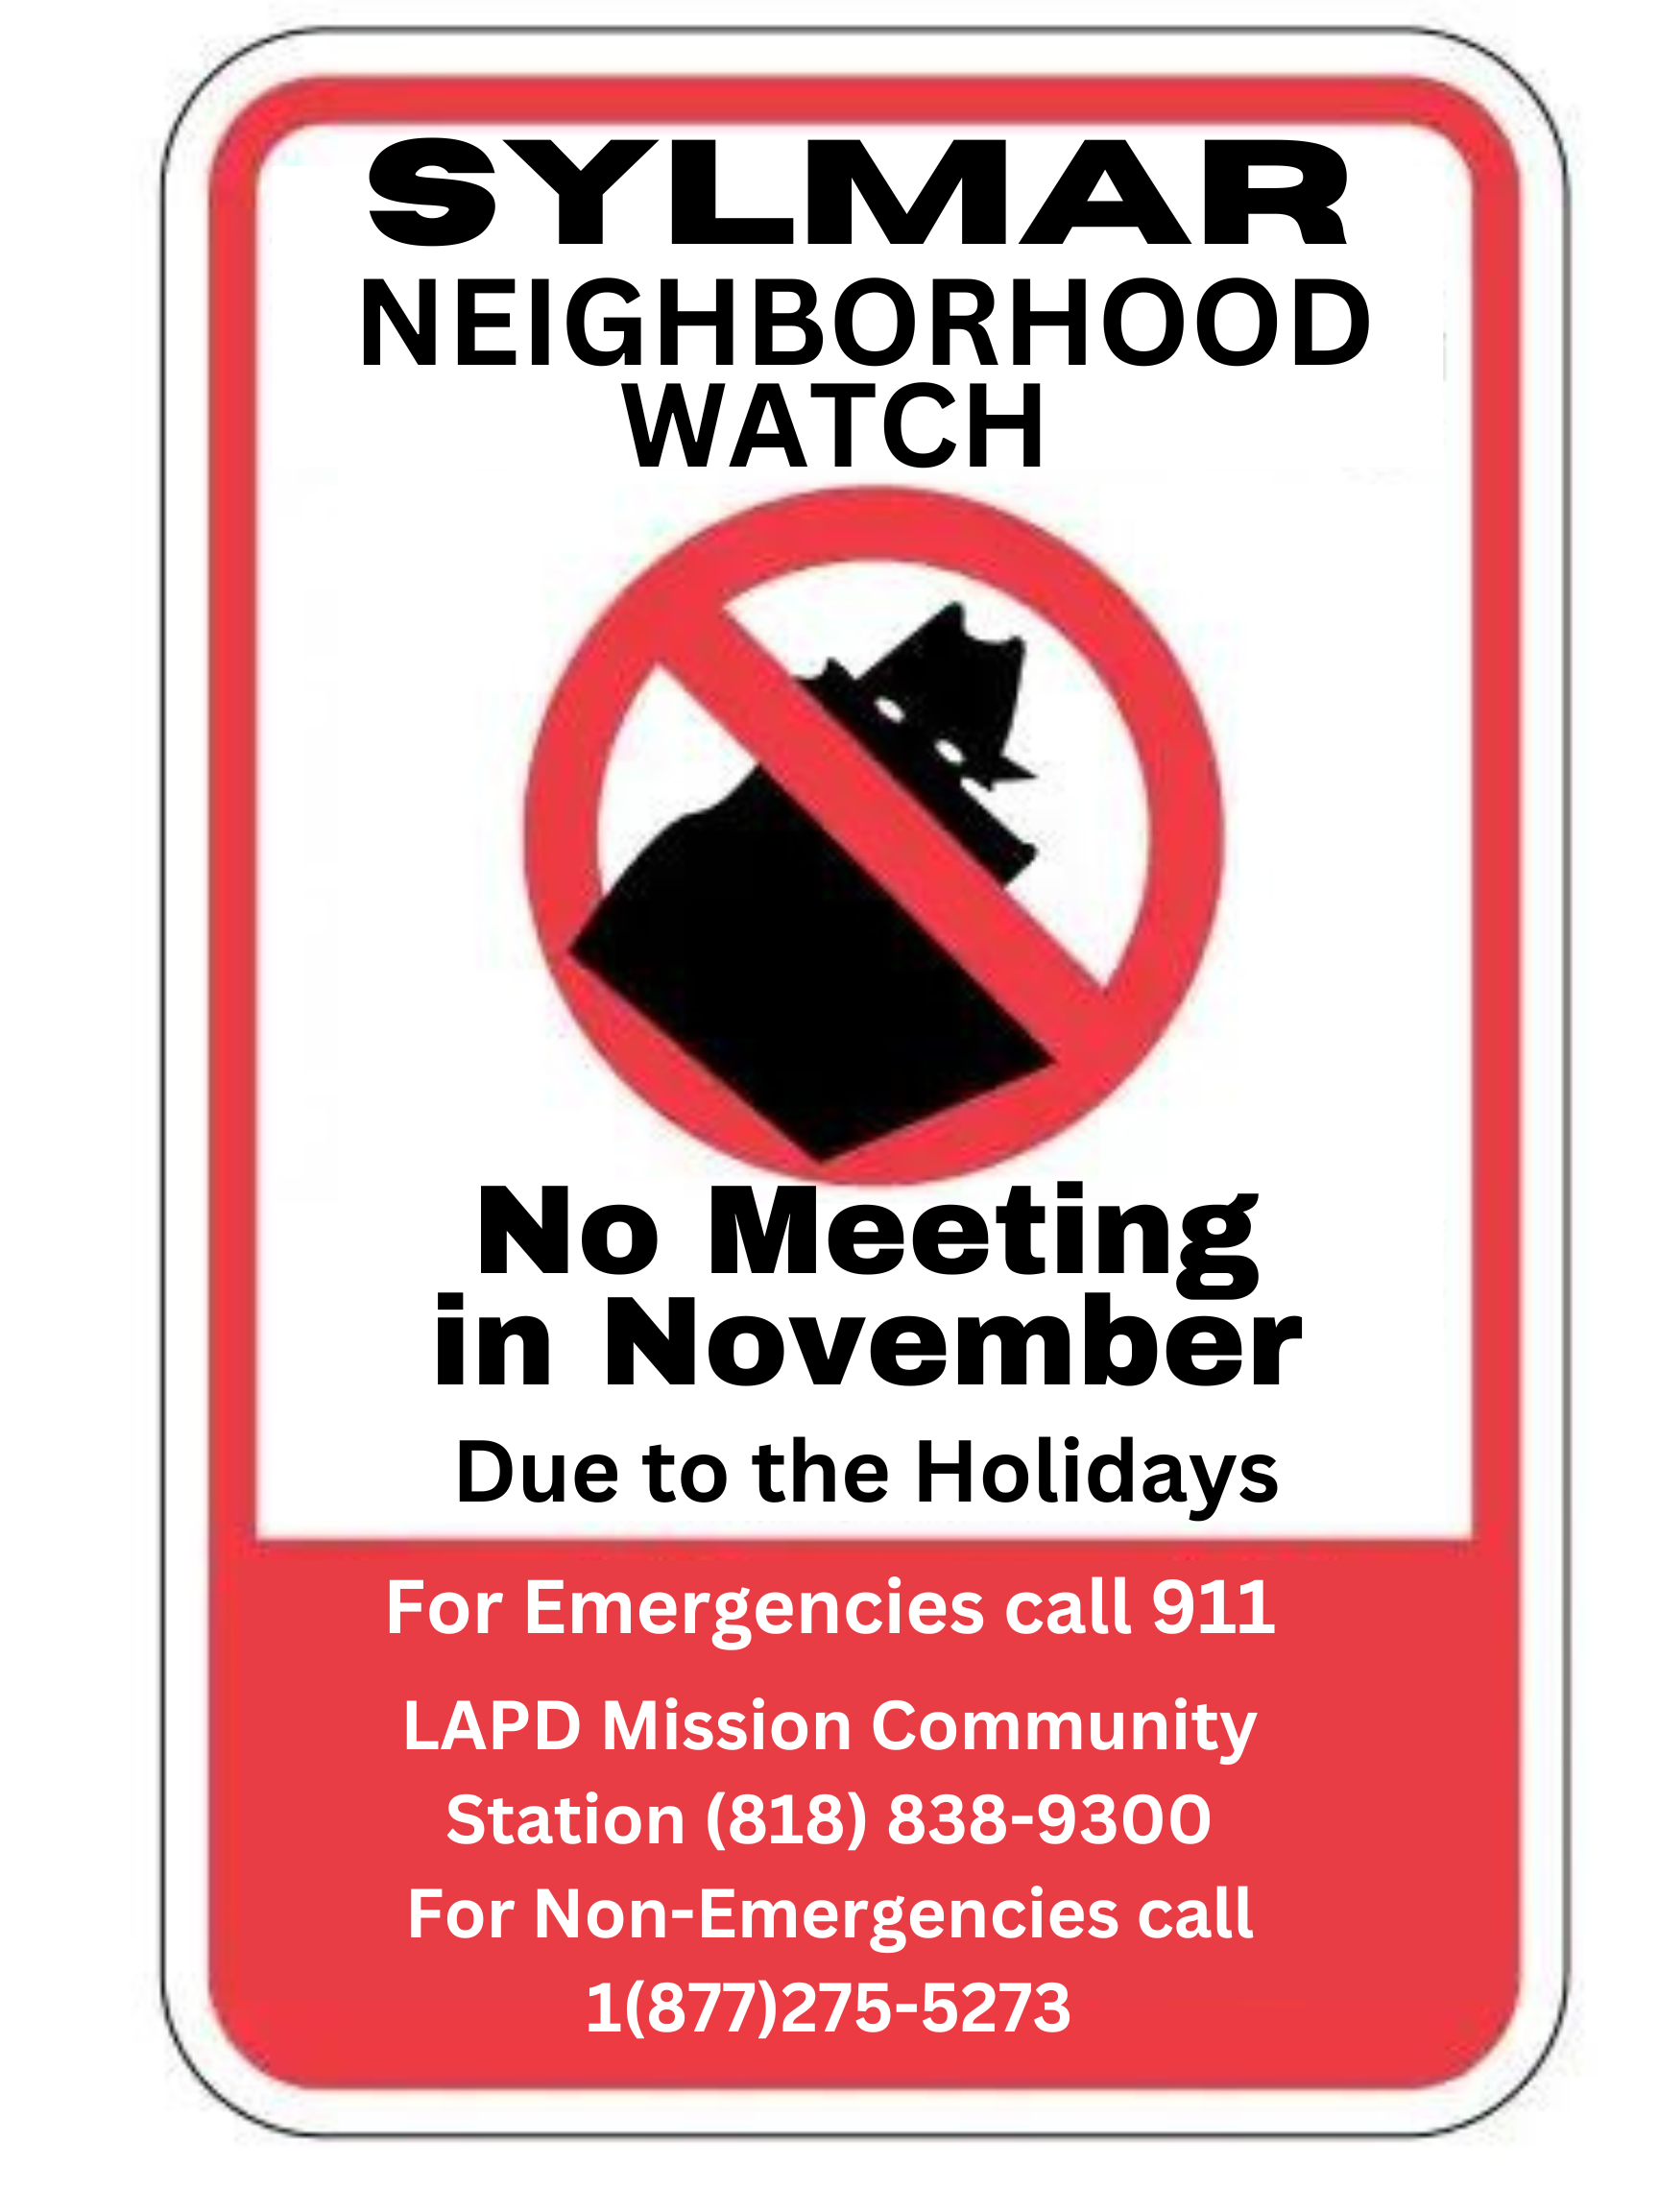 No Community Watch meeting in November due to the Holidays